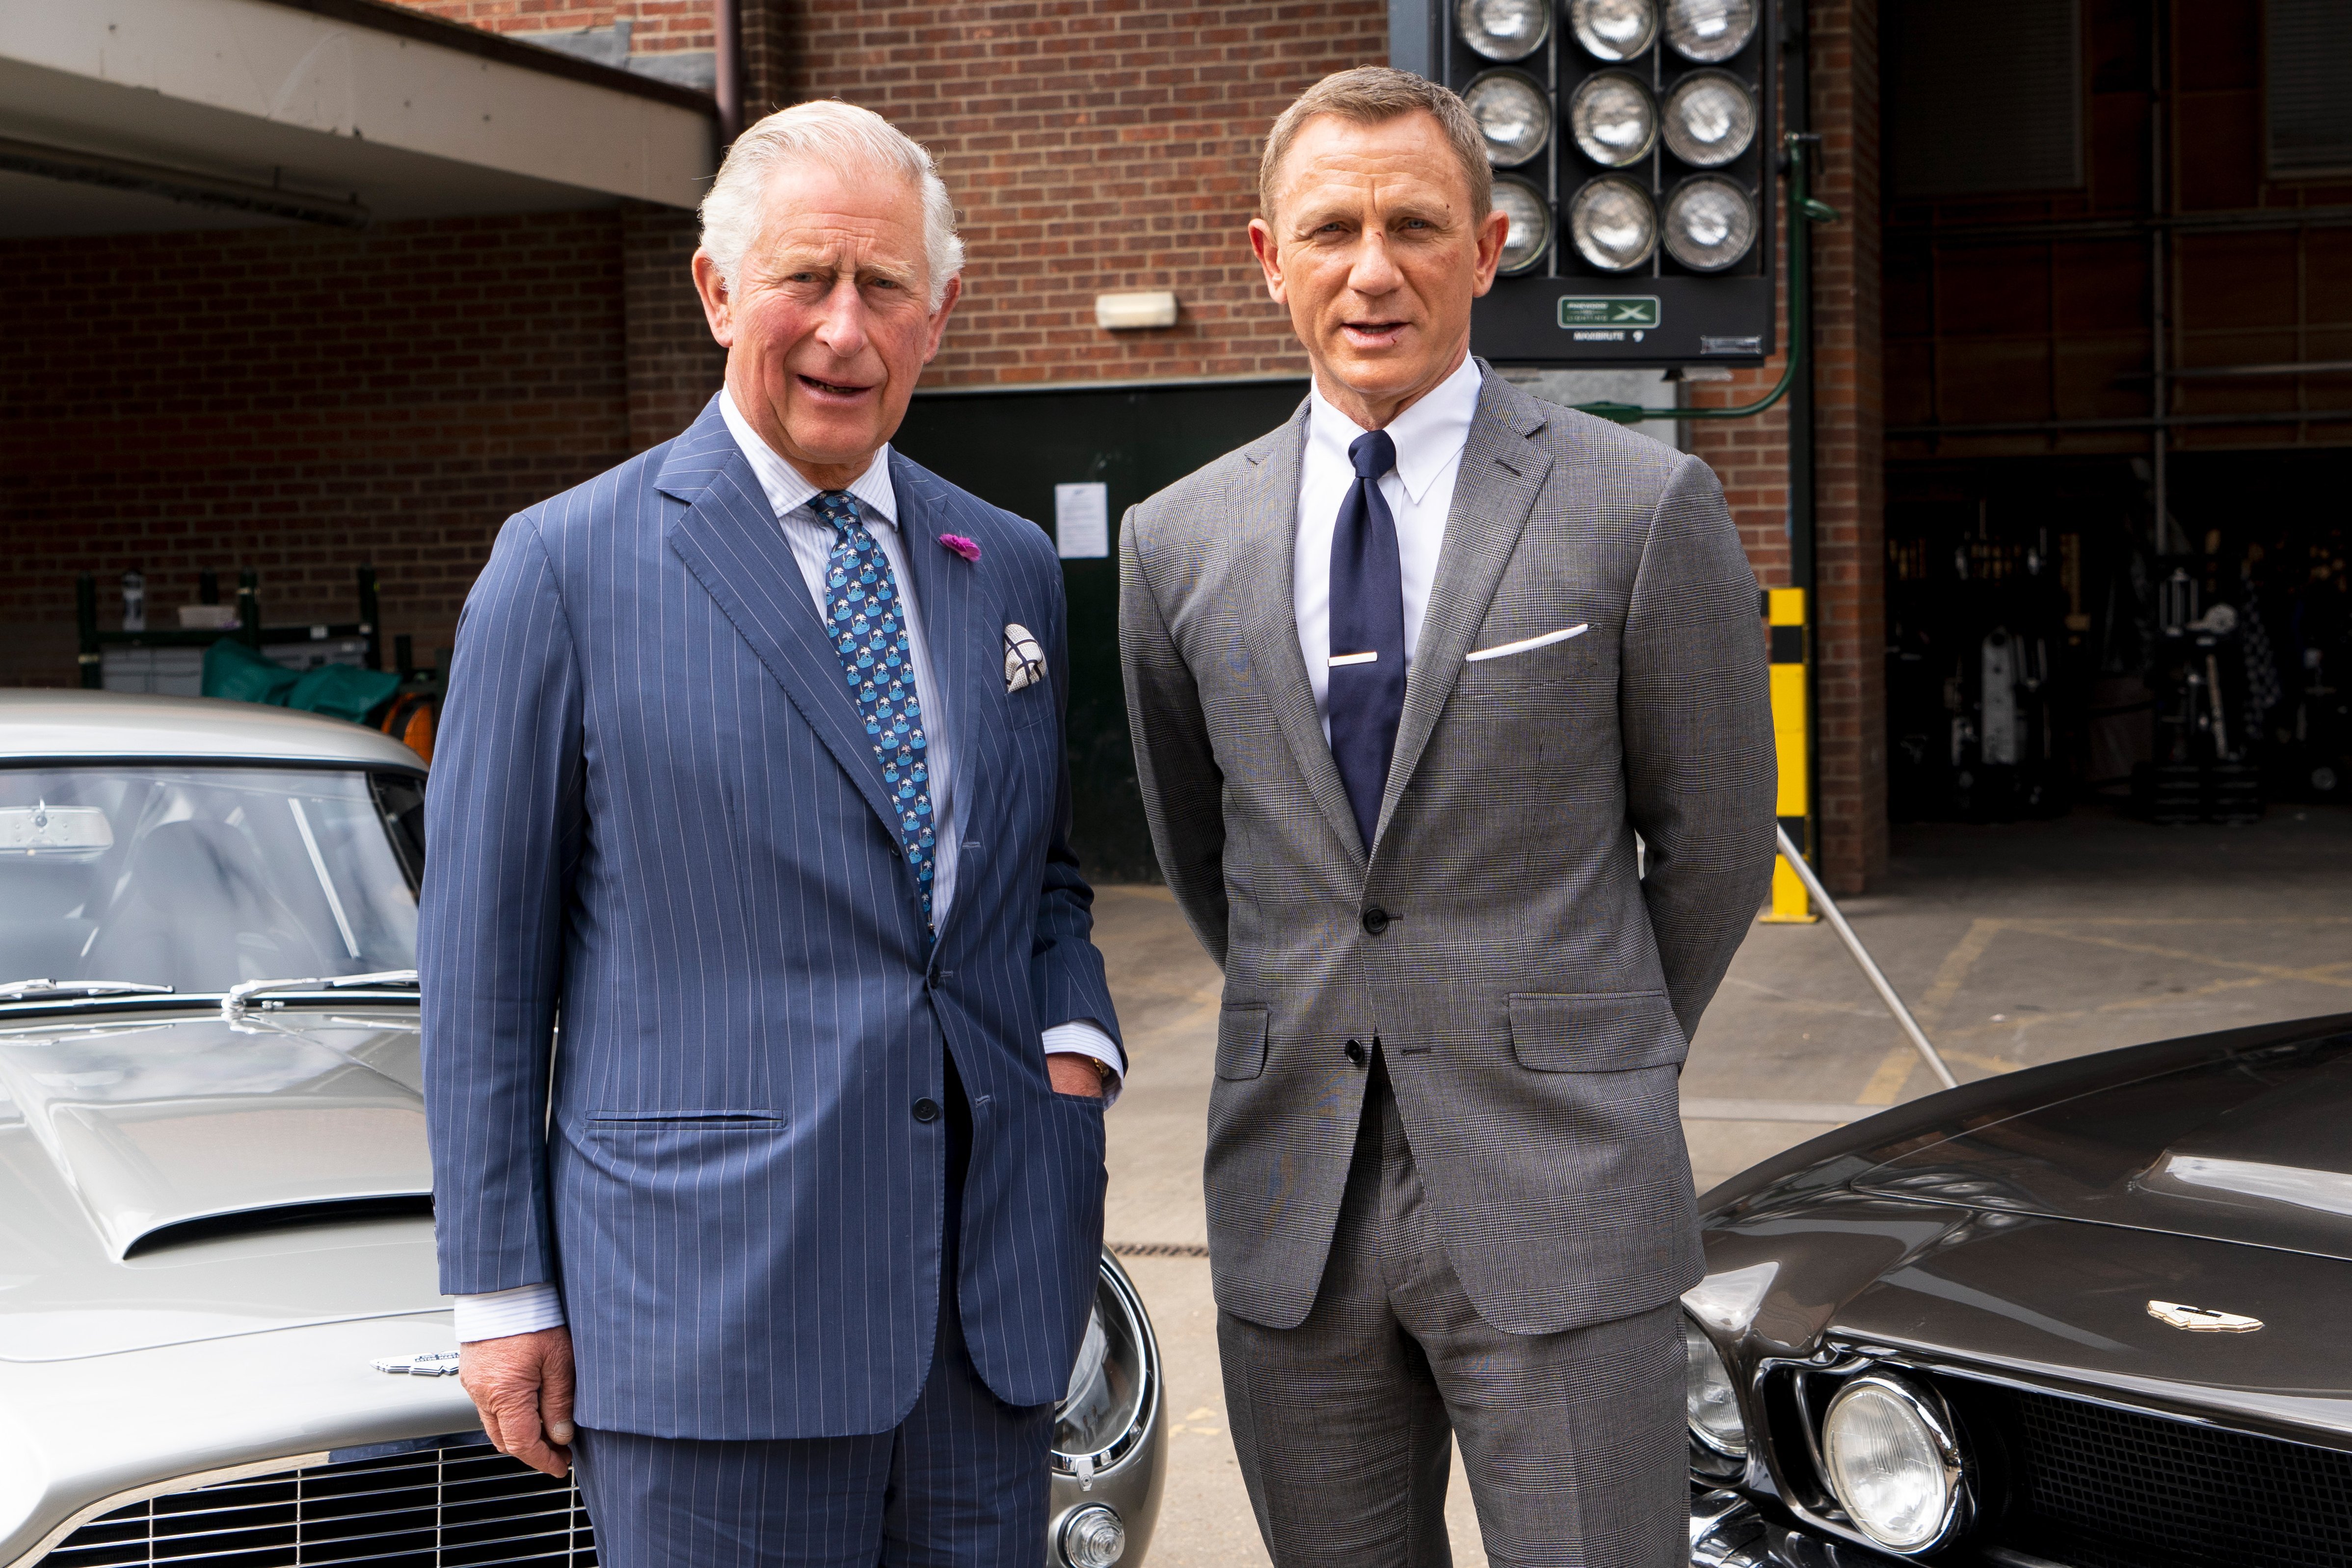 Prince Charles talks to Daniel Craig during a tour of the 25th "James Bond" film set at Pinewood Studios on June 20, 2019 | Photo: Getty Images